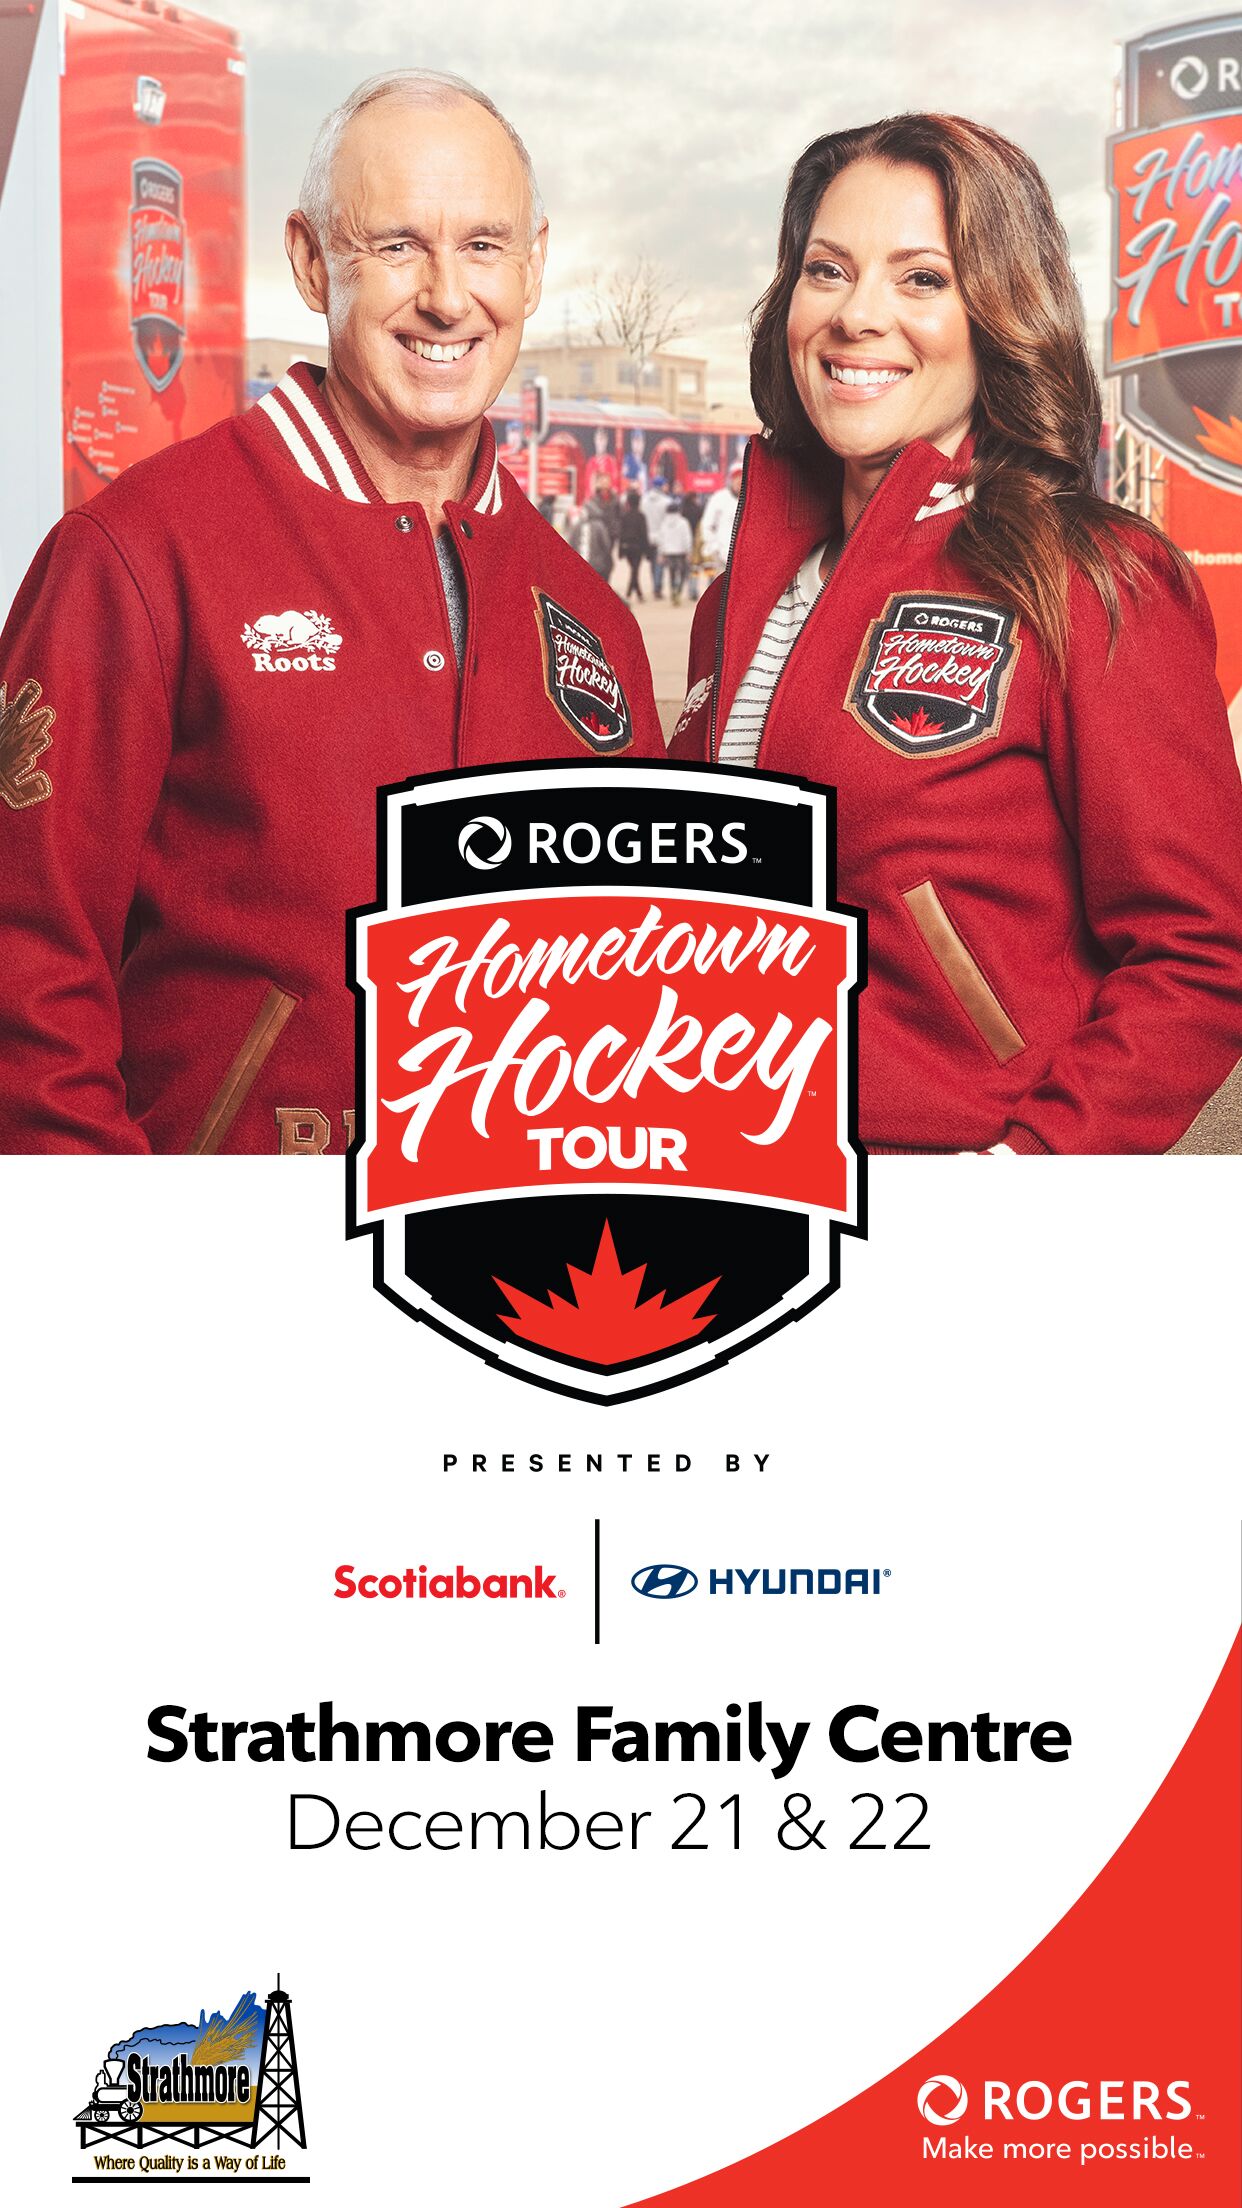 Rogers Hometown Hockey Tour coming to Strathmore!